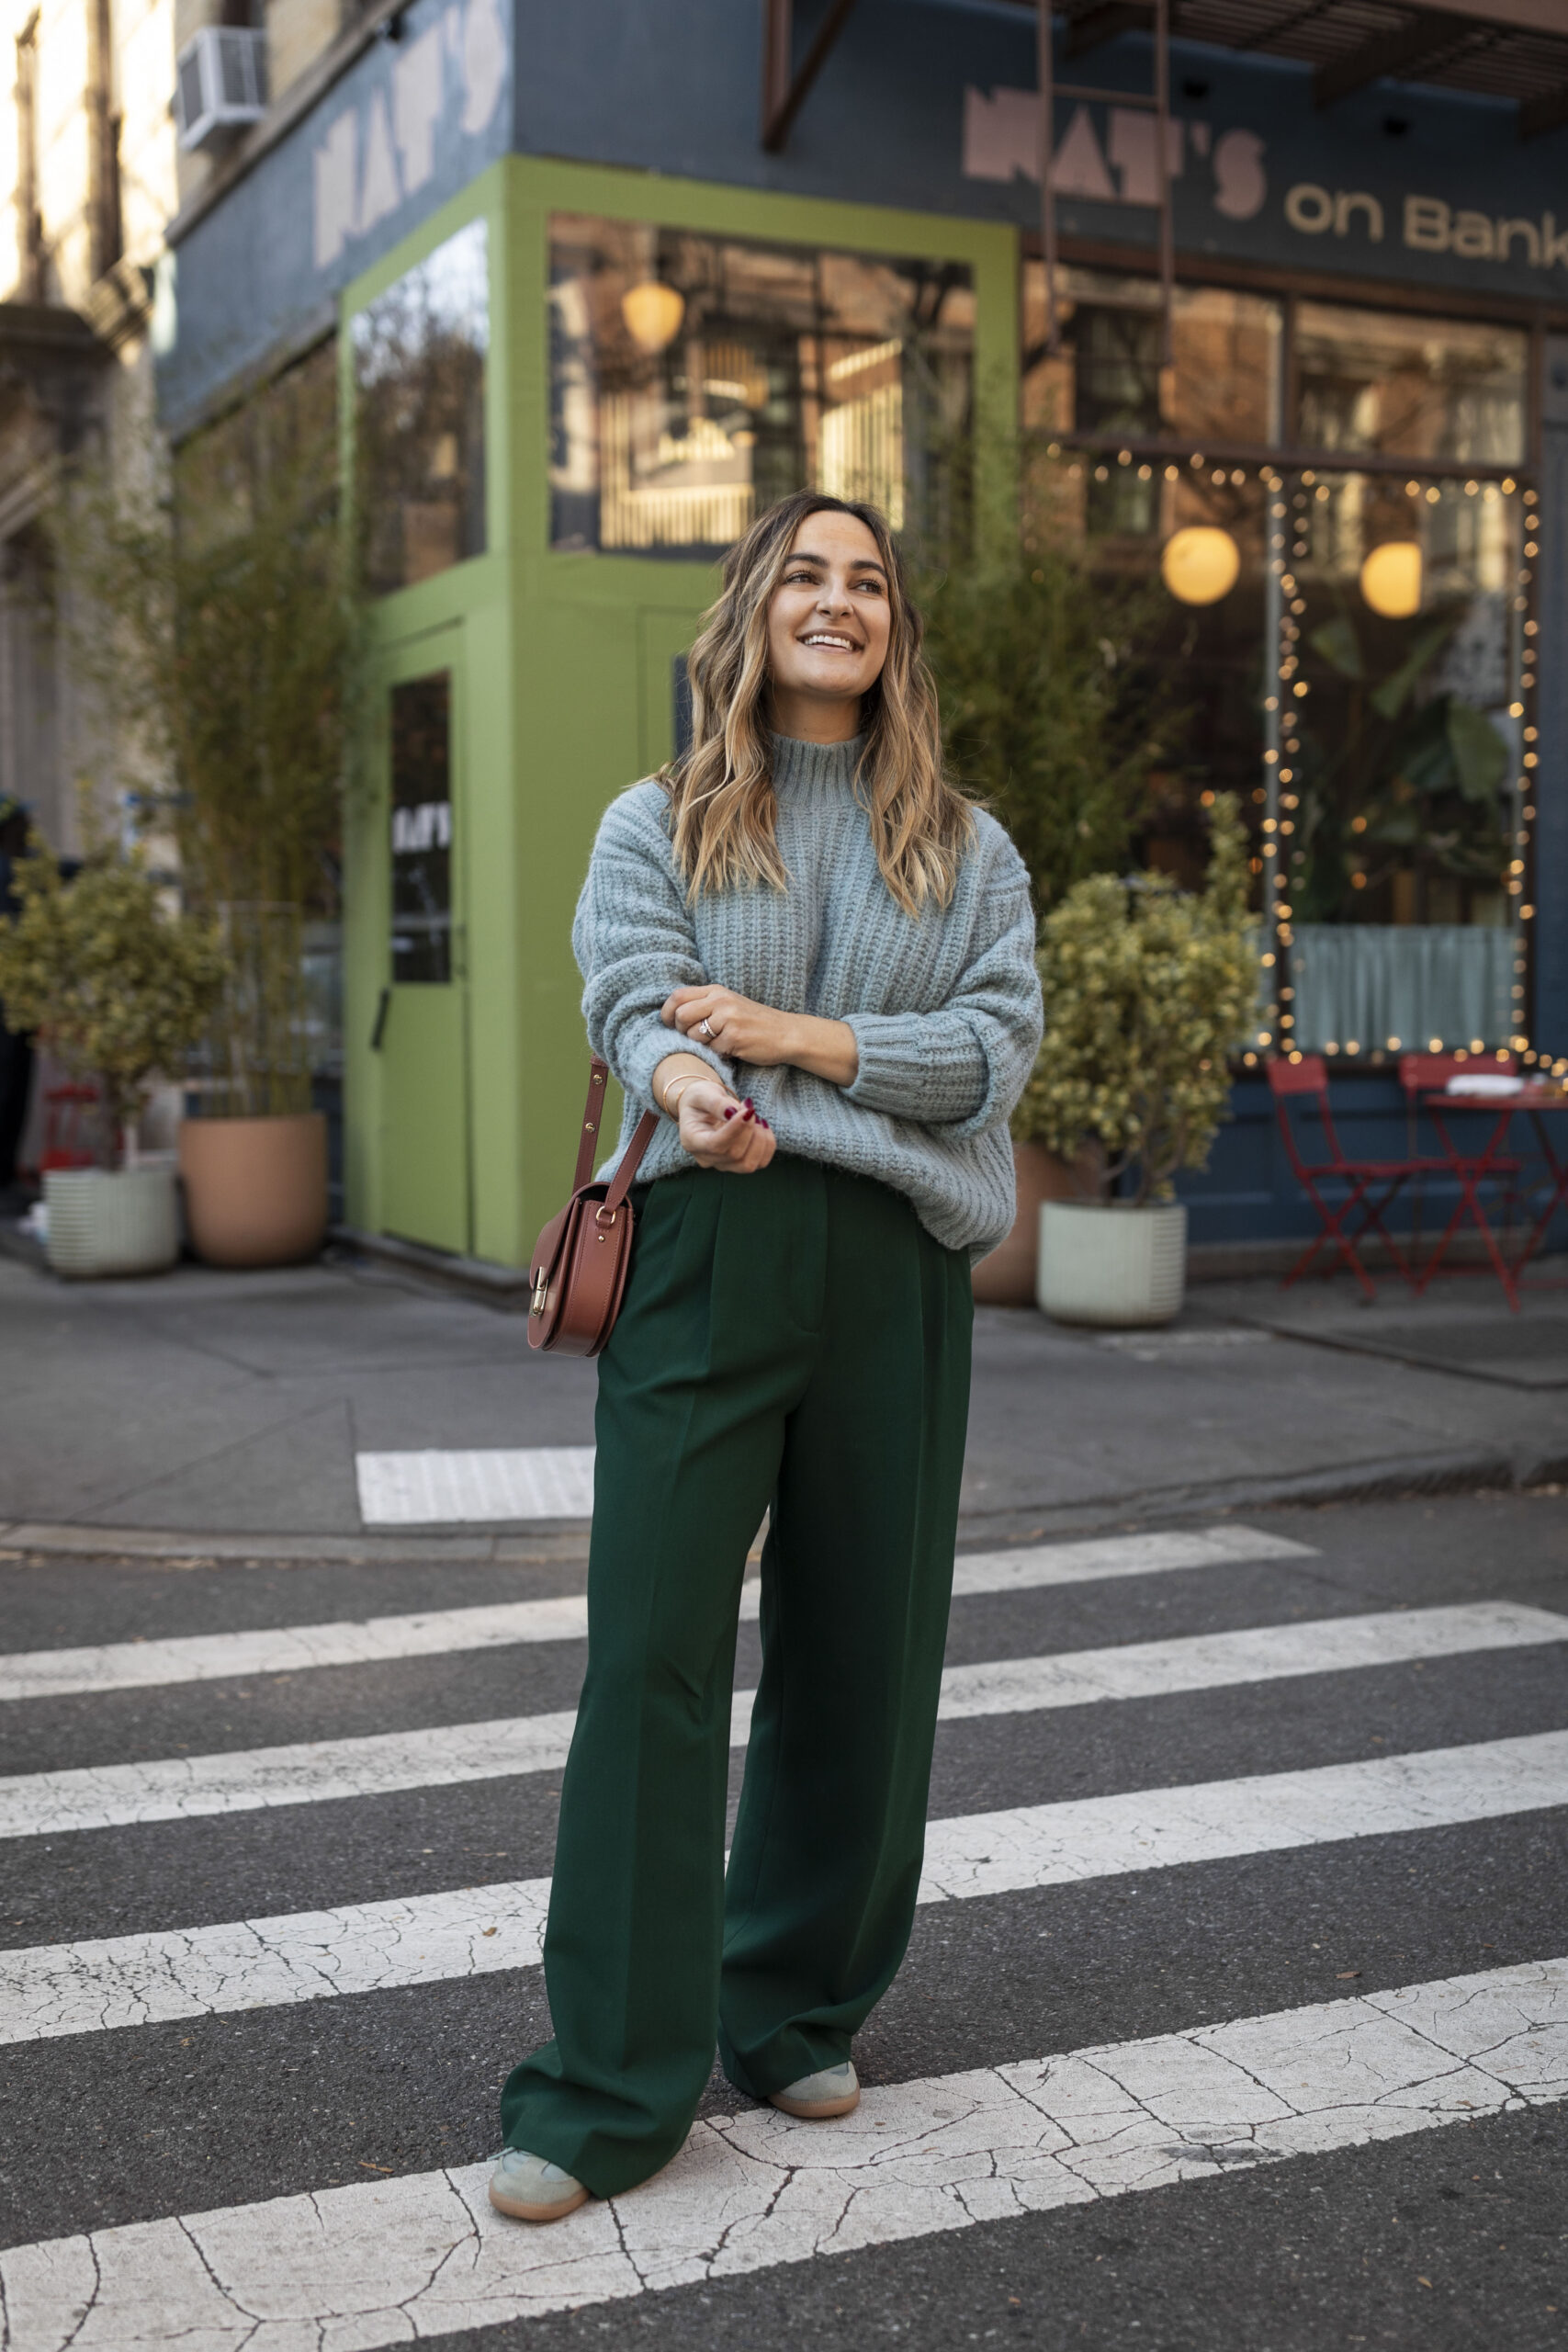 WIDE LEG PANTS OUTFIT IDEAS  STYLISH AND CLASSY WAYS TO STYLE PALAZZO PANTS  